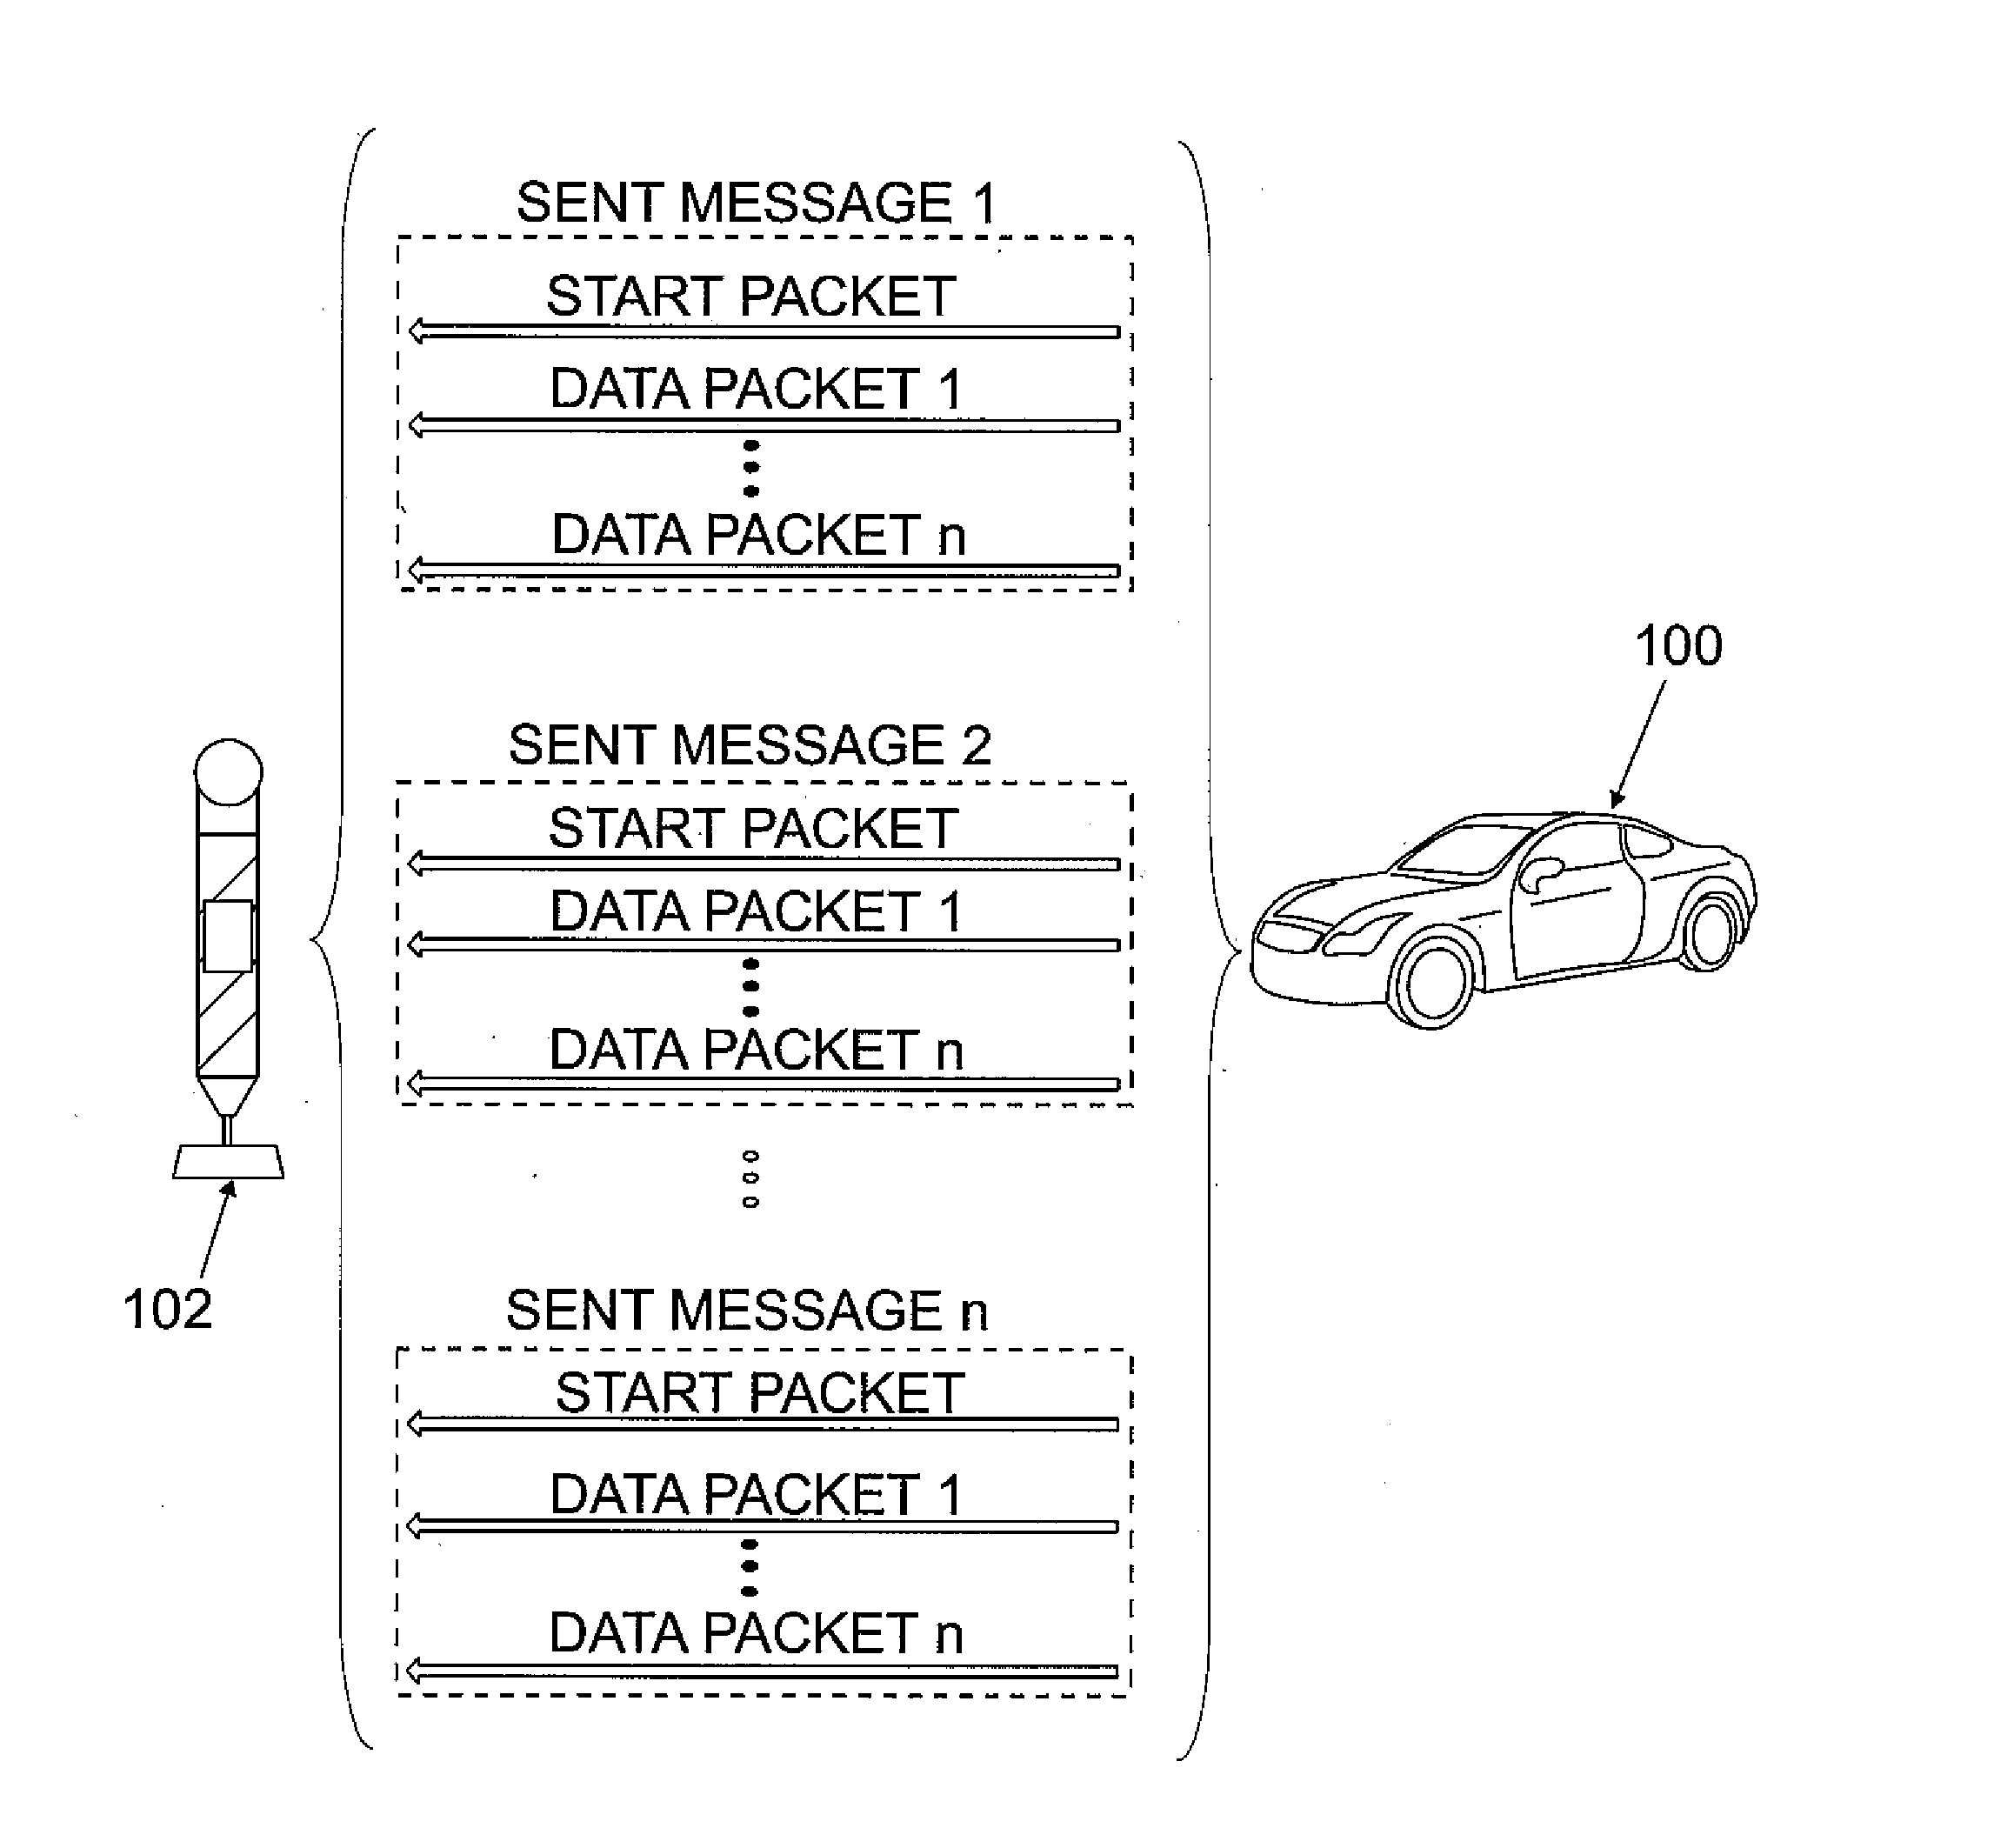 System and method for the access to information contained in motor vehicles